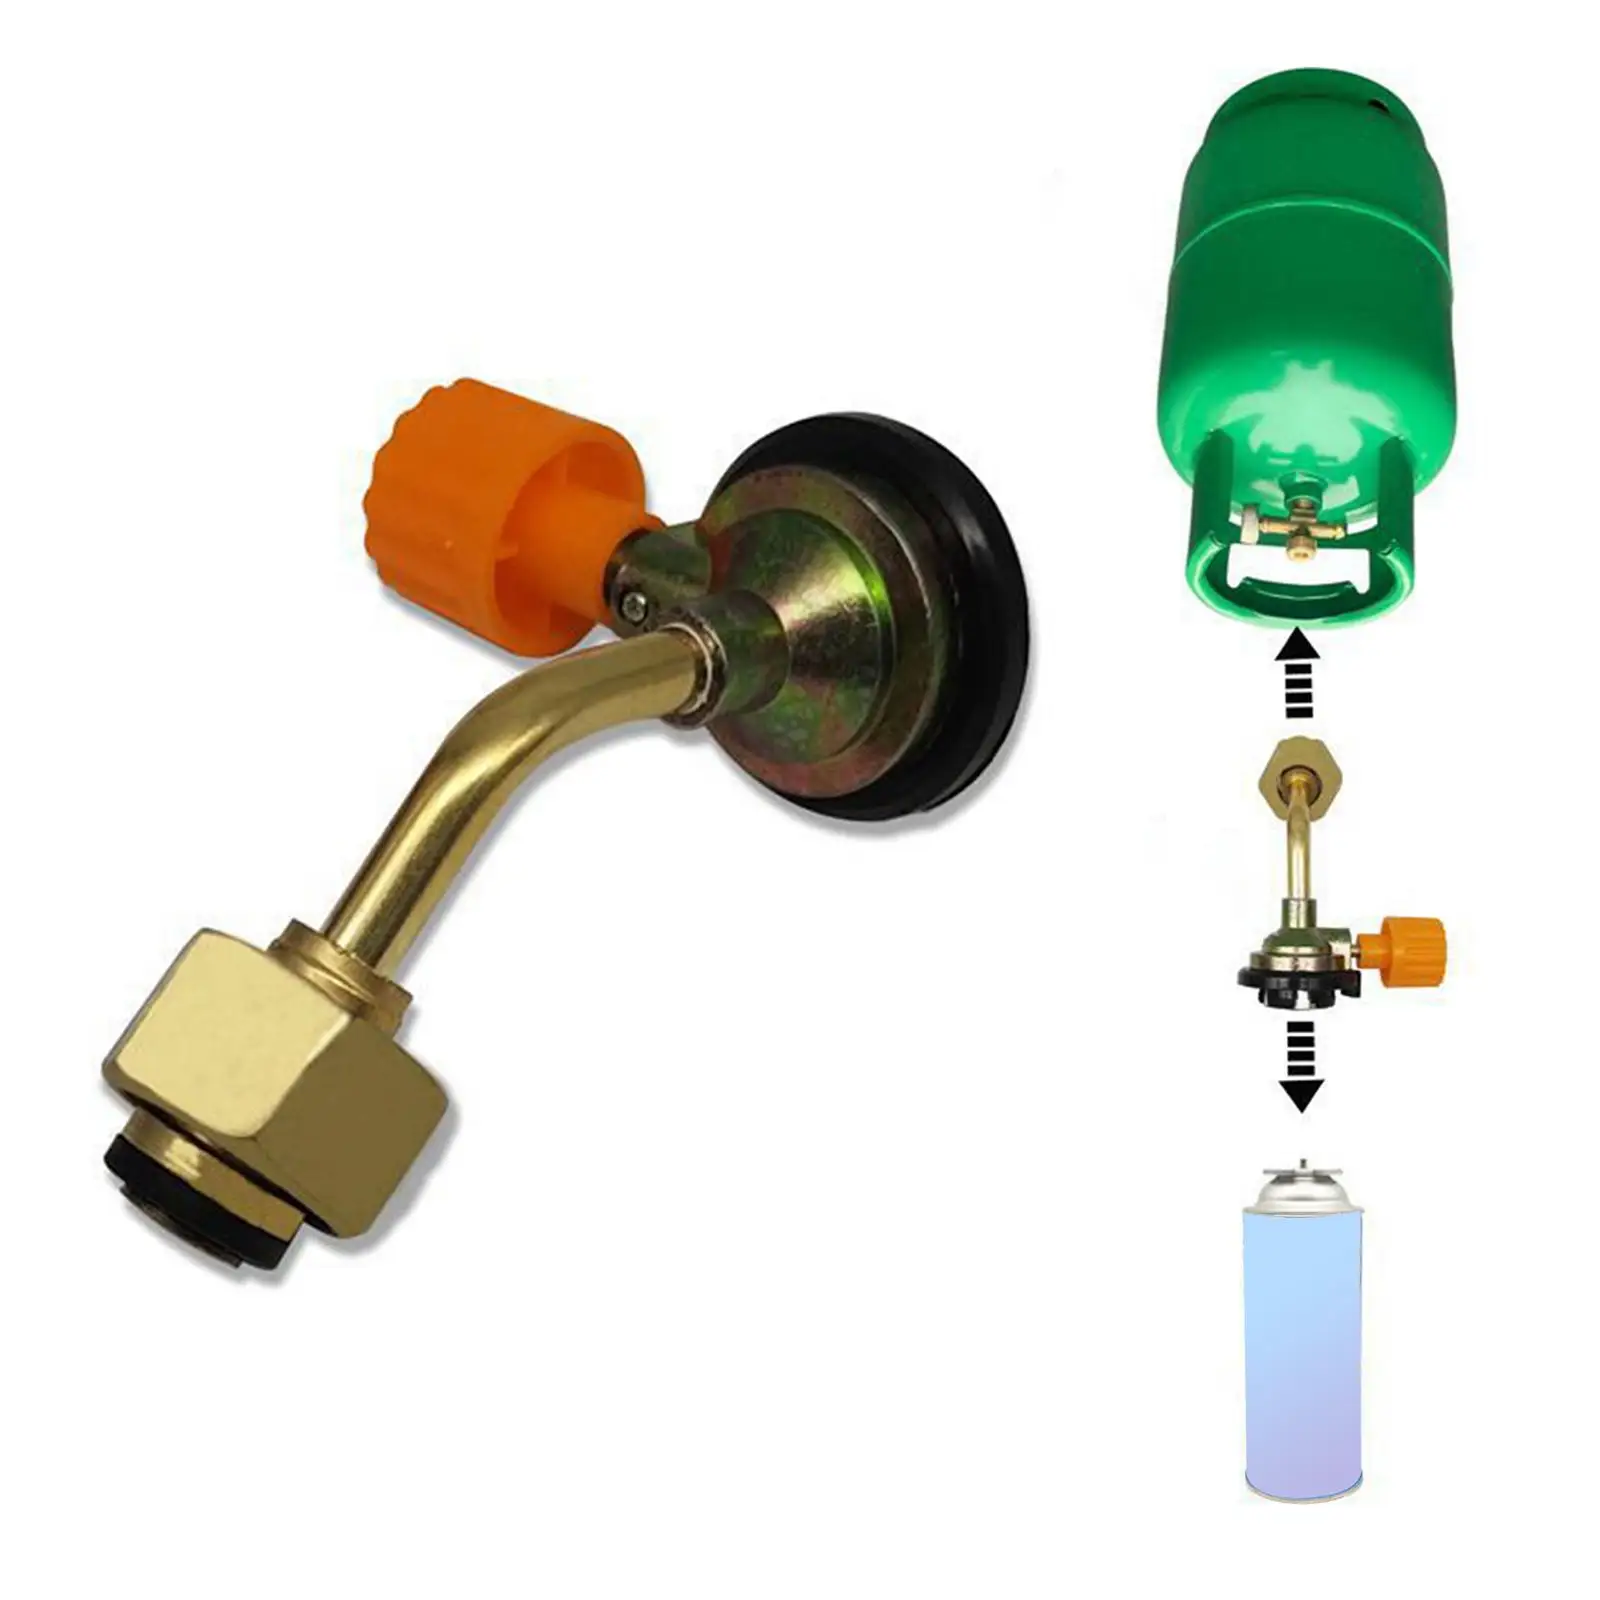 Gas Tank Refill Adapter Canister Accessories Filling Device Integrated Filling Valve Conversion Connector for Camping Supplies